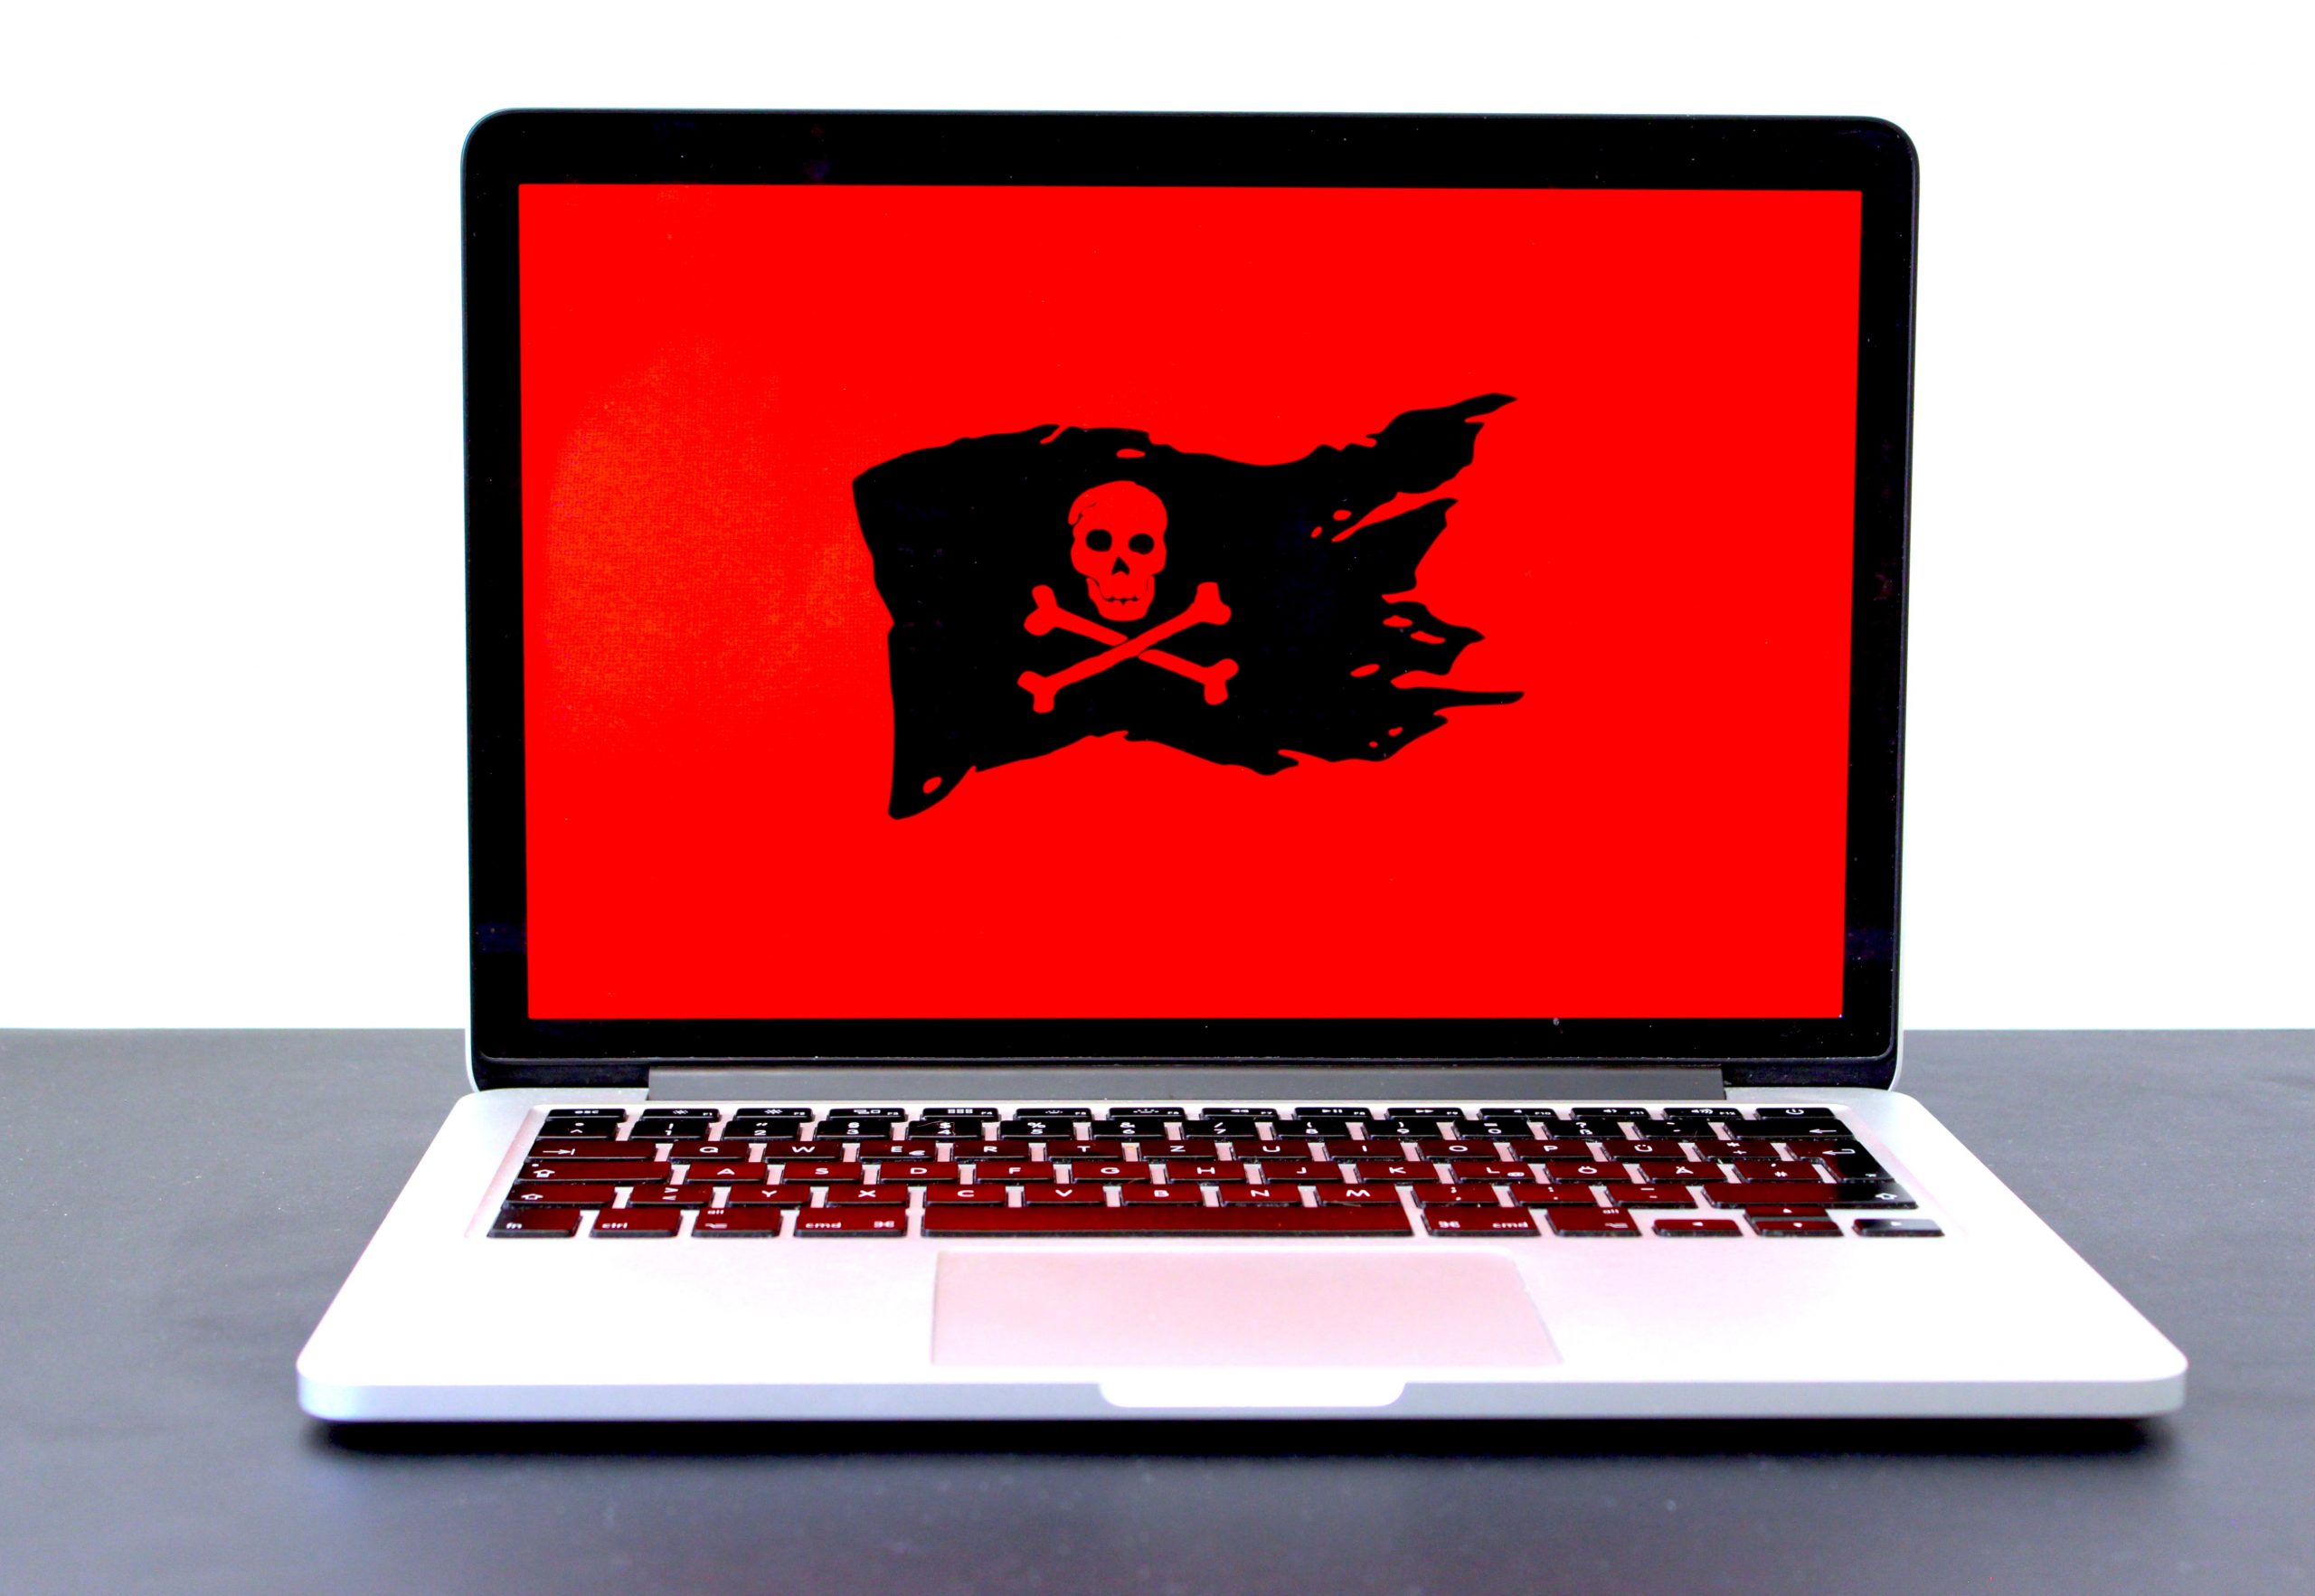 Why the music industry is still fighting against piracy in 2021